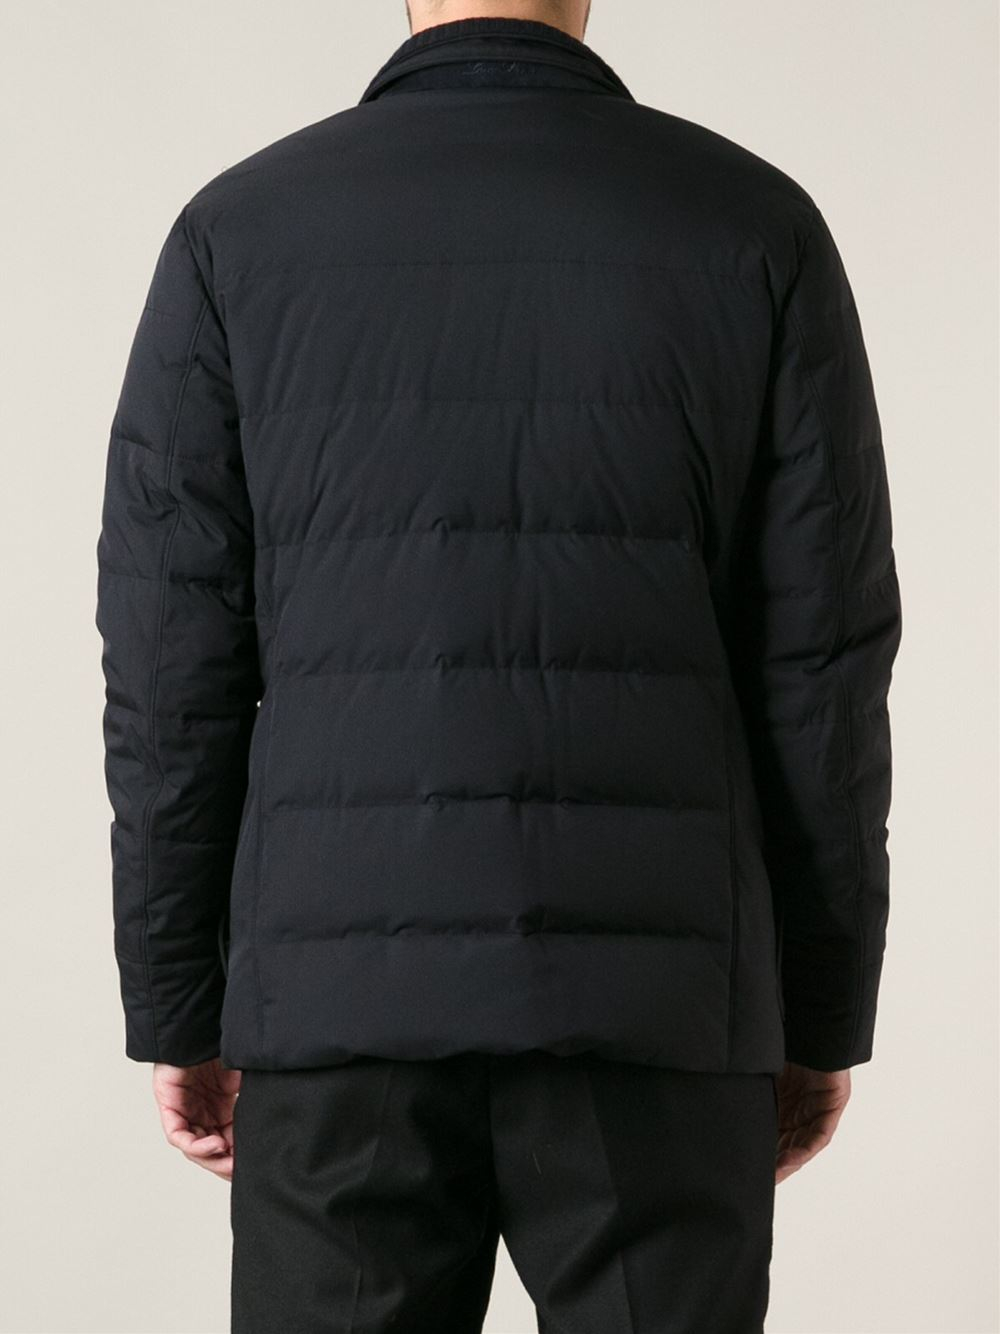 Lyst - Loro Piana Storm Feather Down Jacket in Black for Men